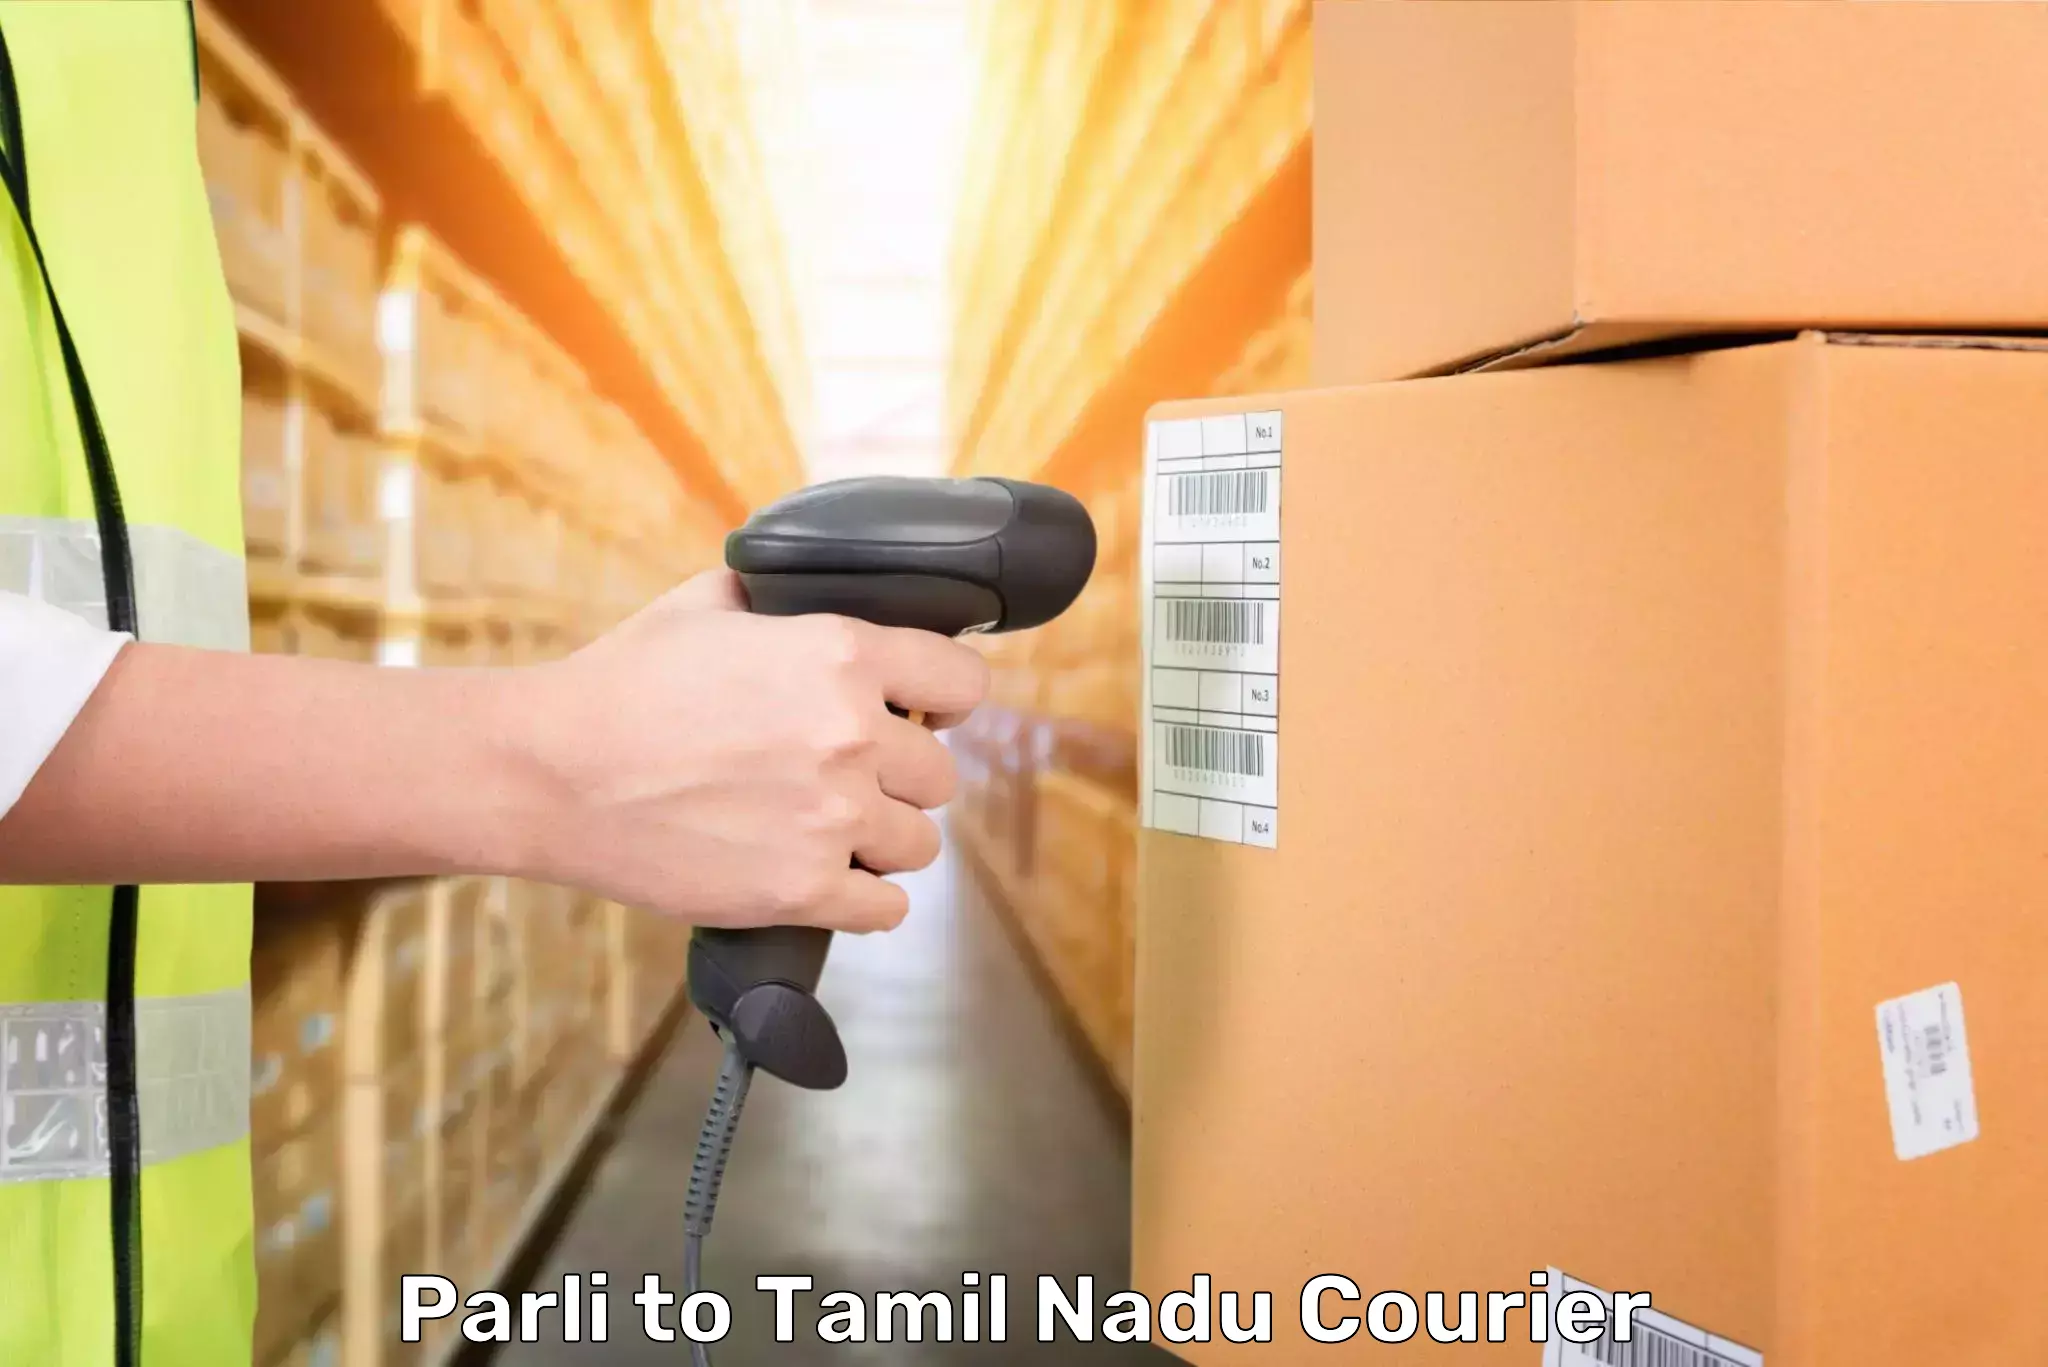 Luggage delivery network Parli to Tamil Nadu